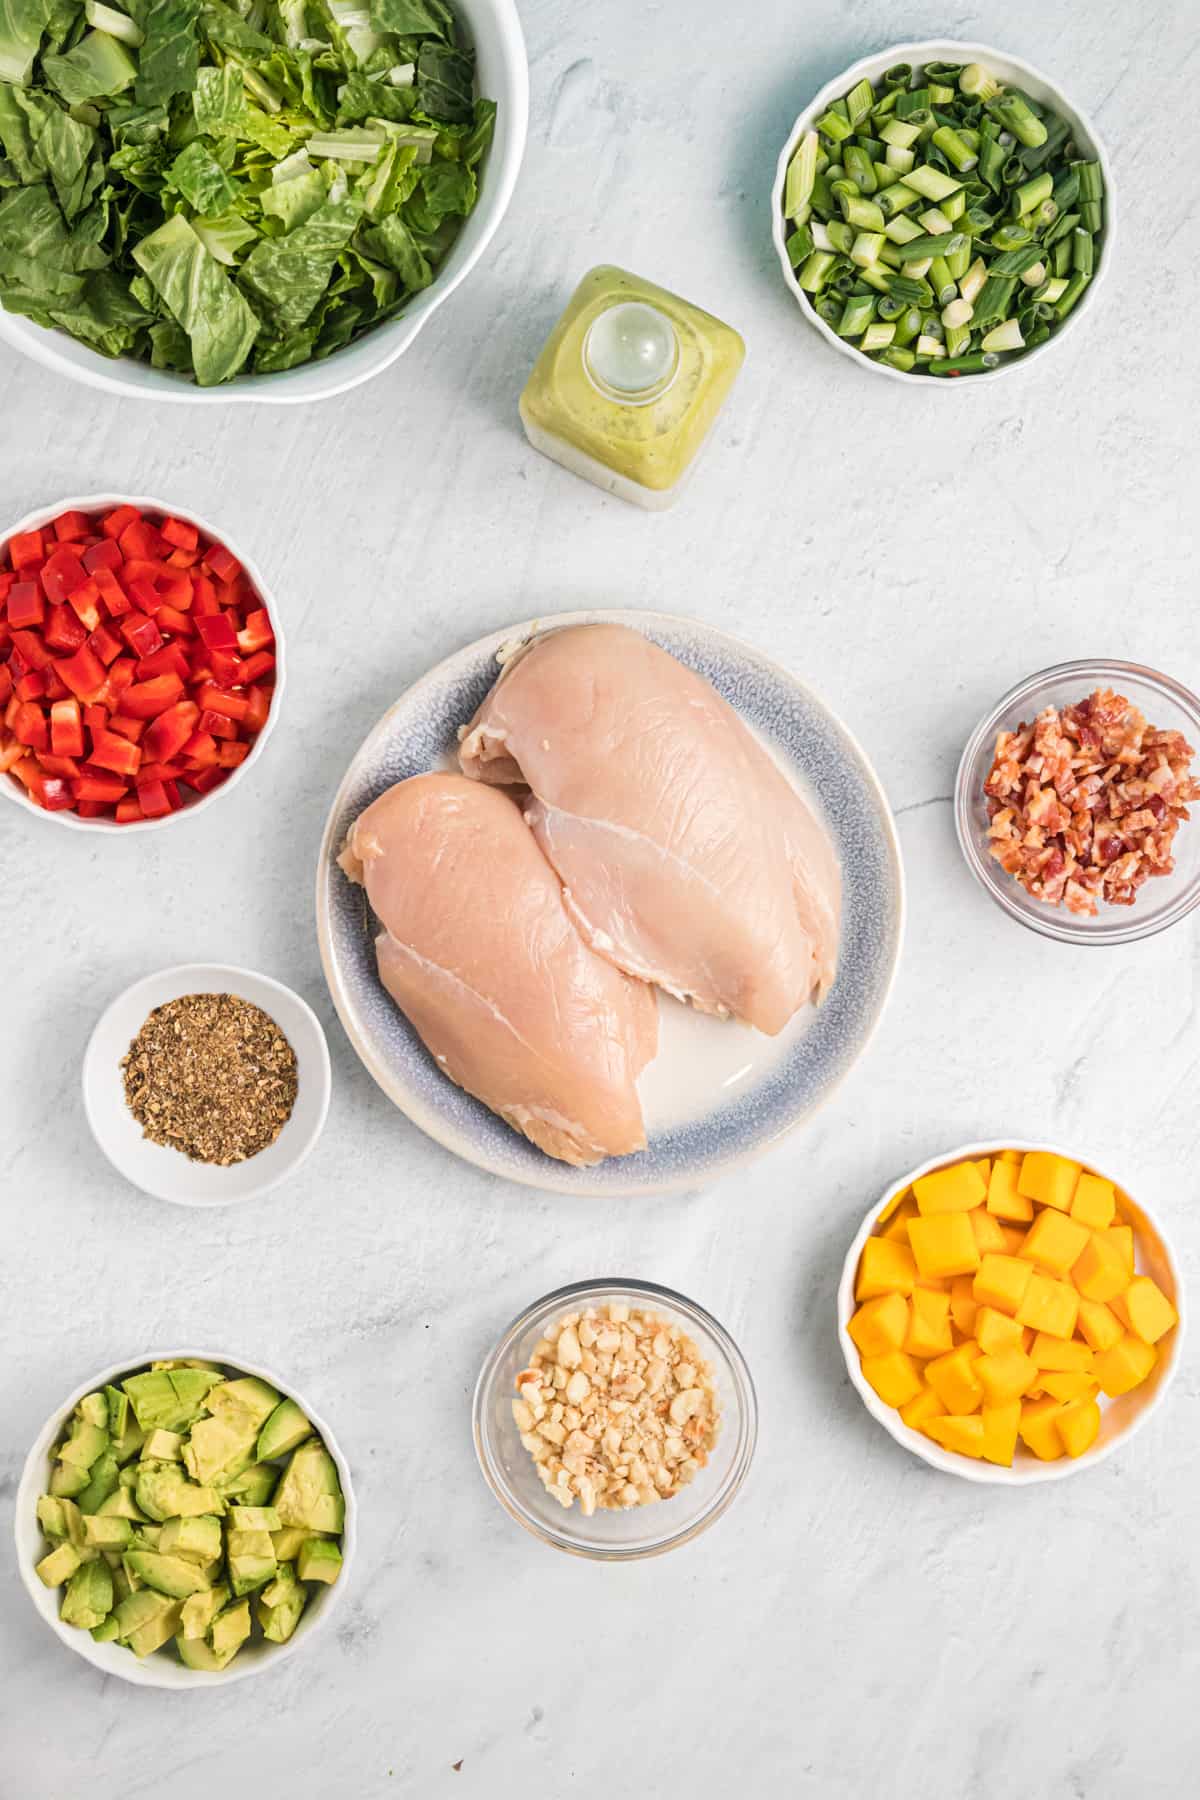 The ingredients for cobb salad are placed on a white countertop.